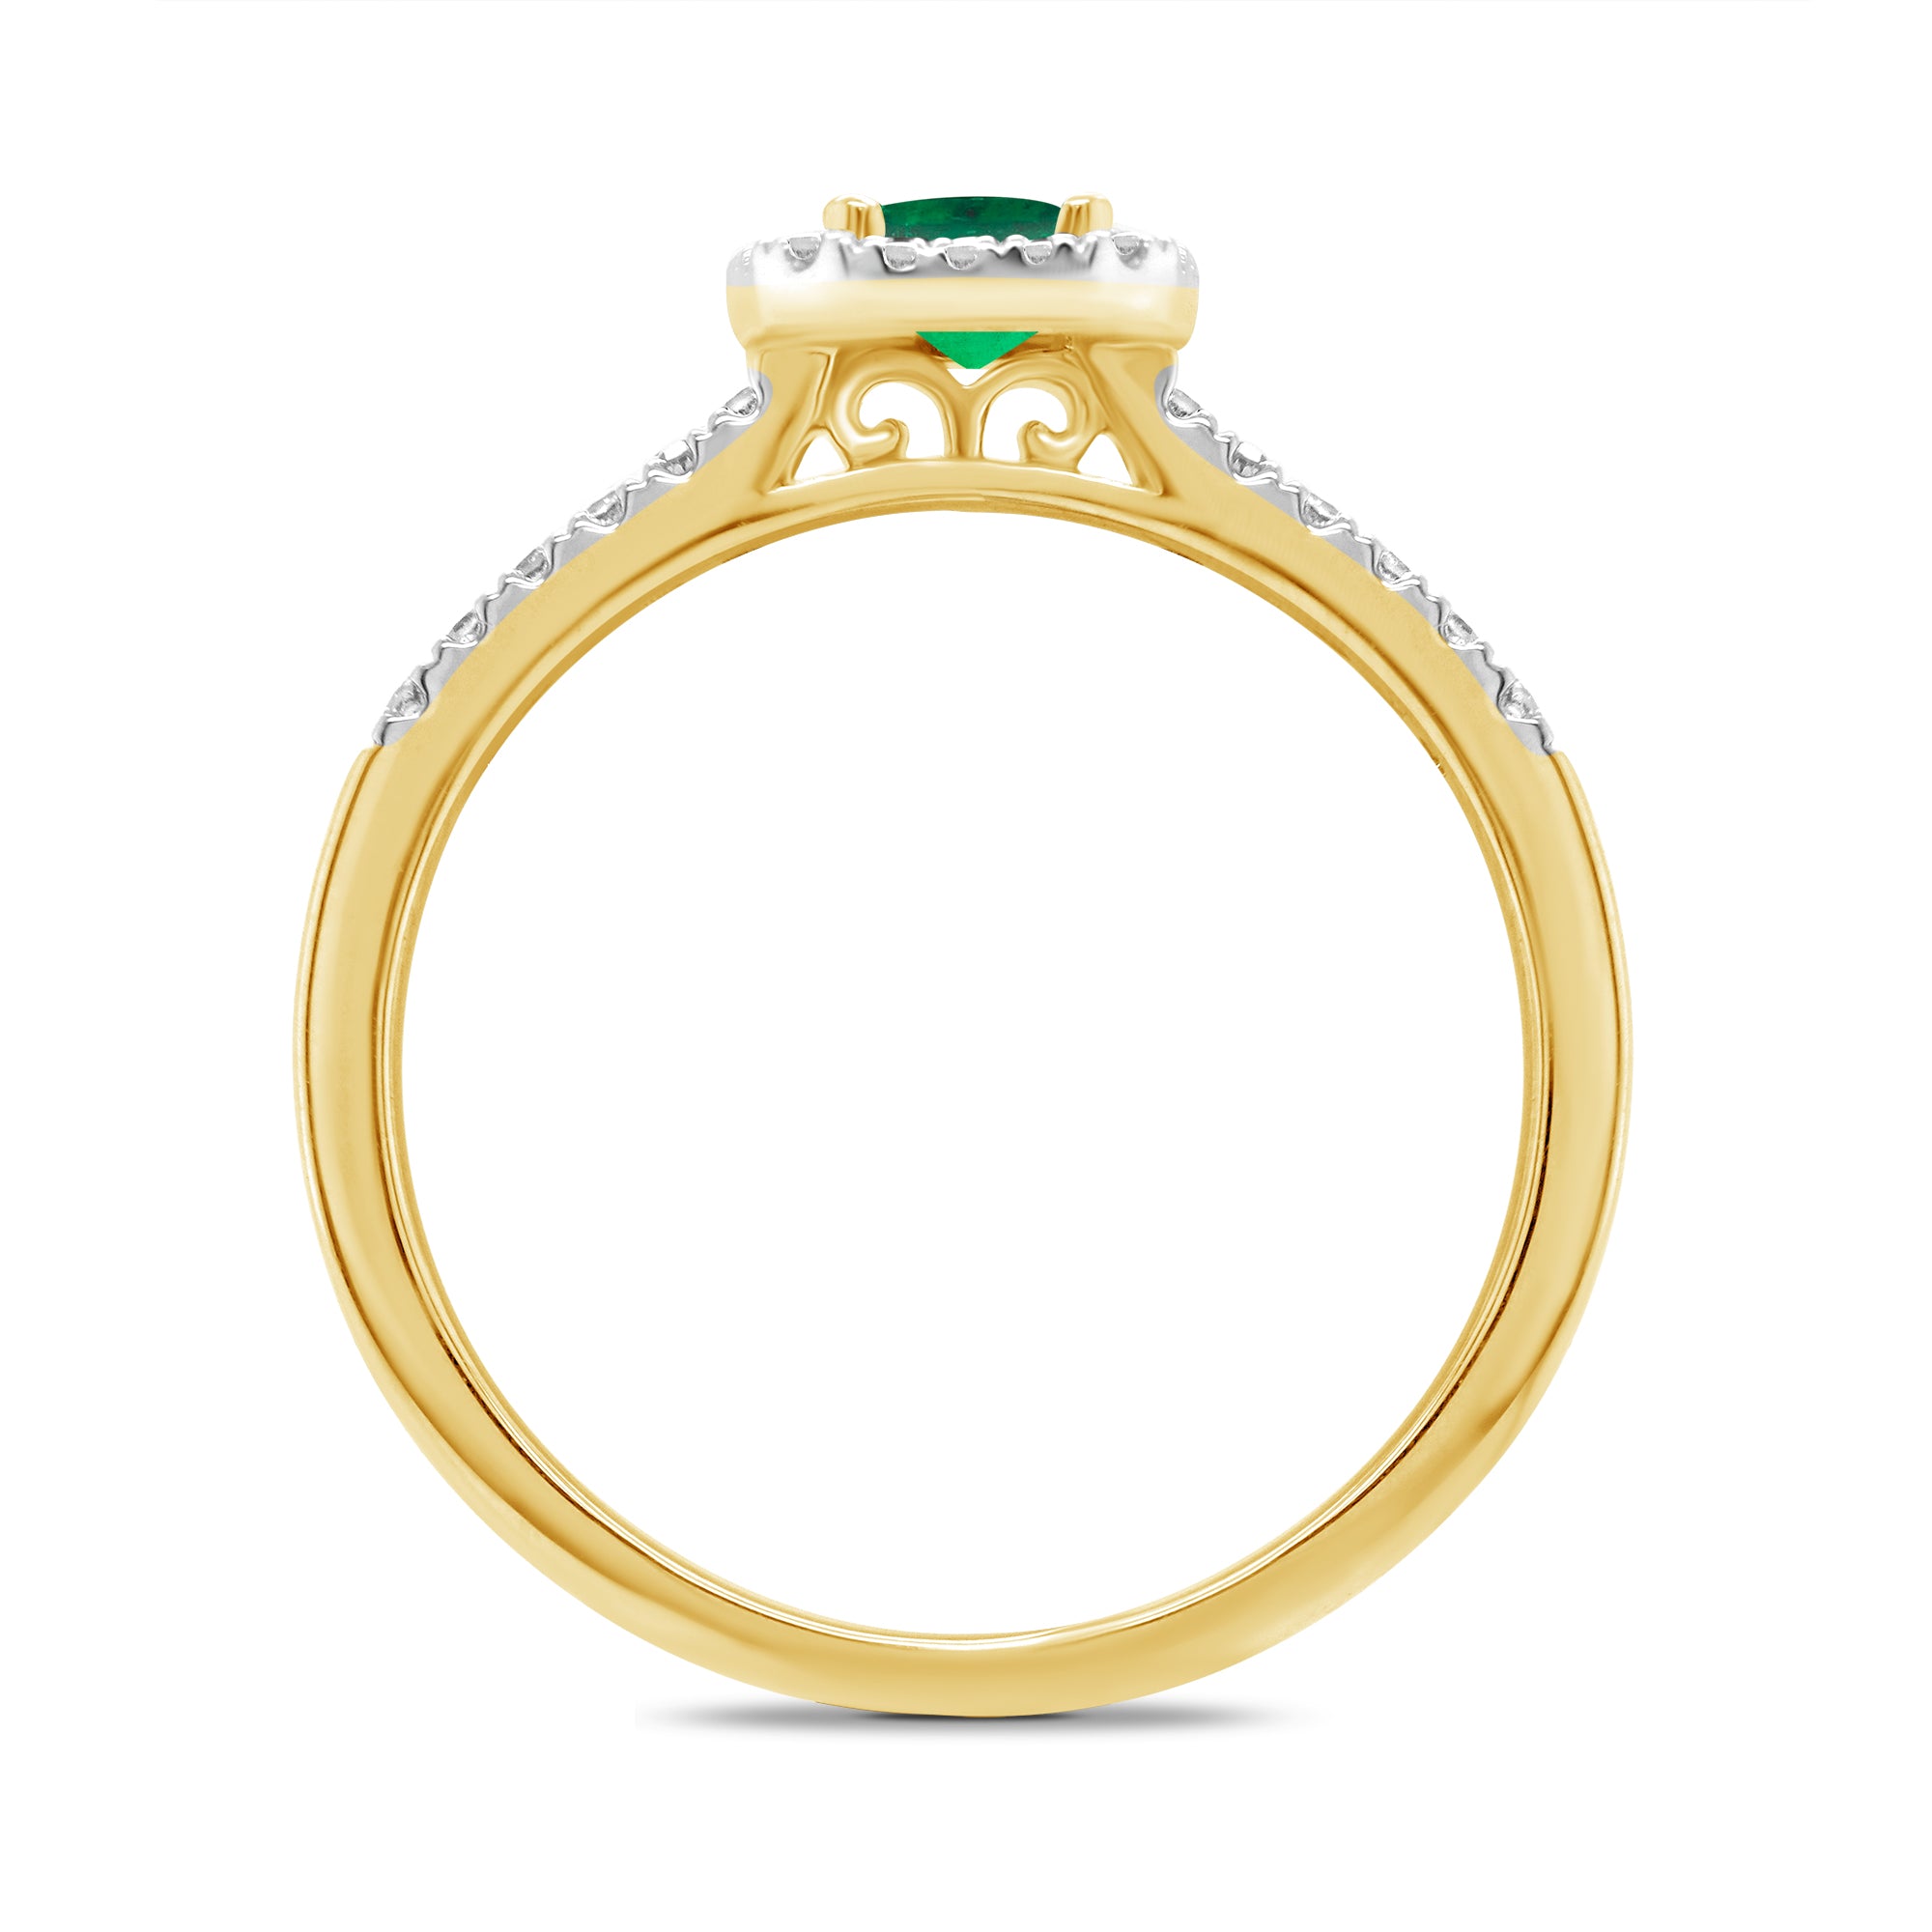 9ct gold 6x4mm octagon cut emerald & diamond cluster ring with diamond set shoulders 0.20ct